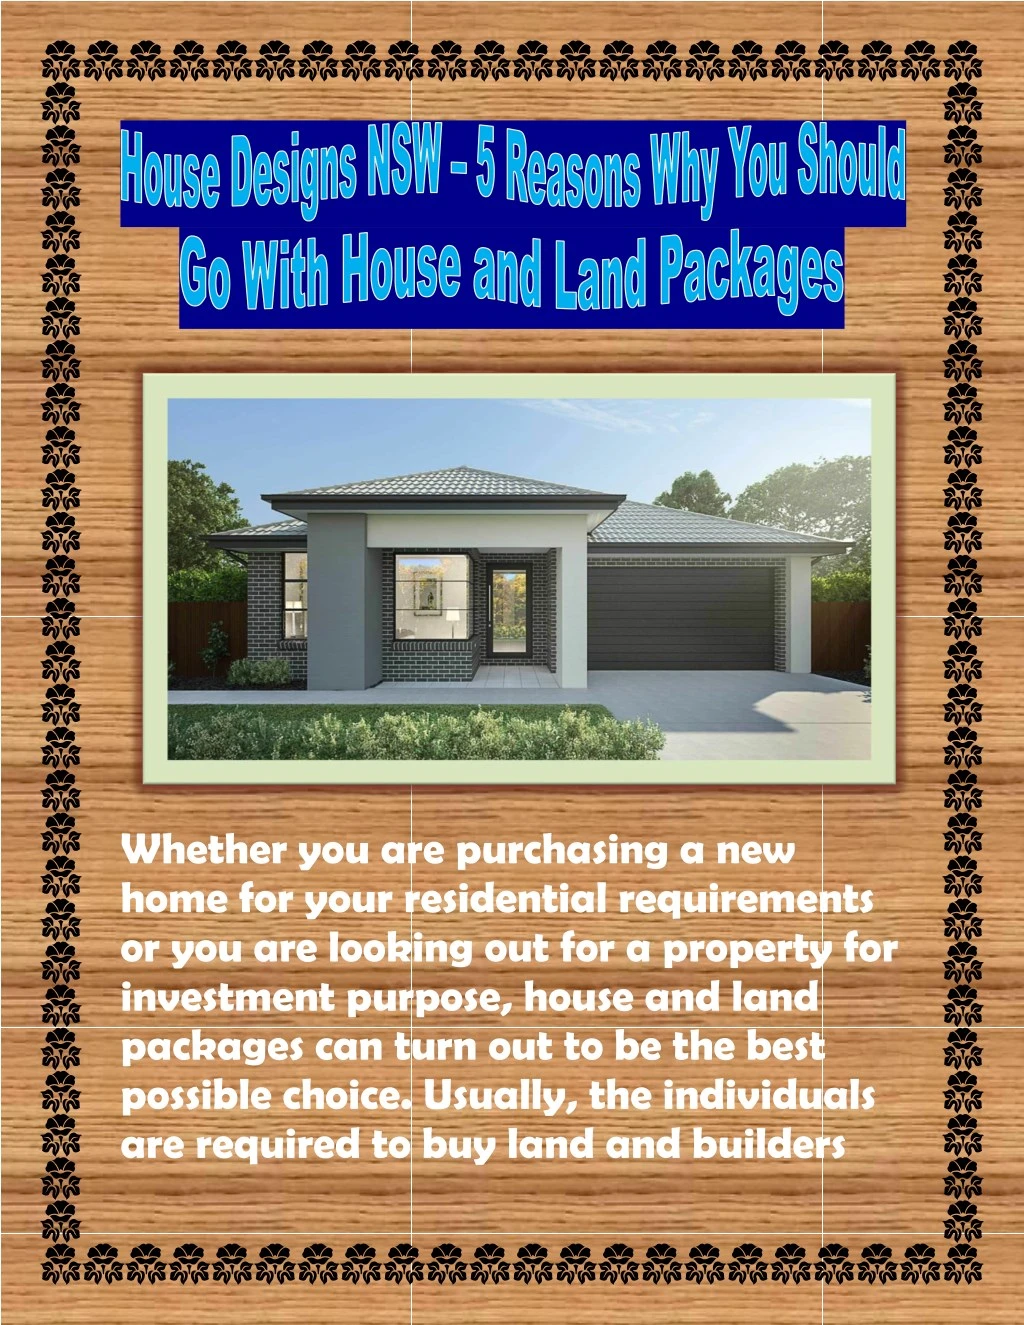 whether you are purchasing a new home for your